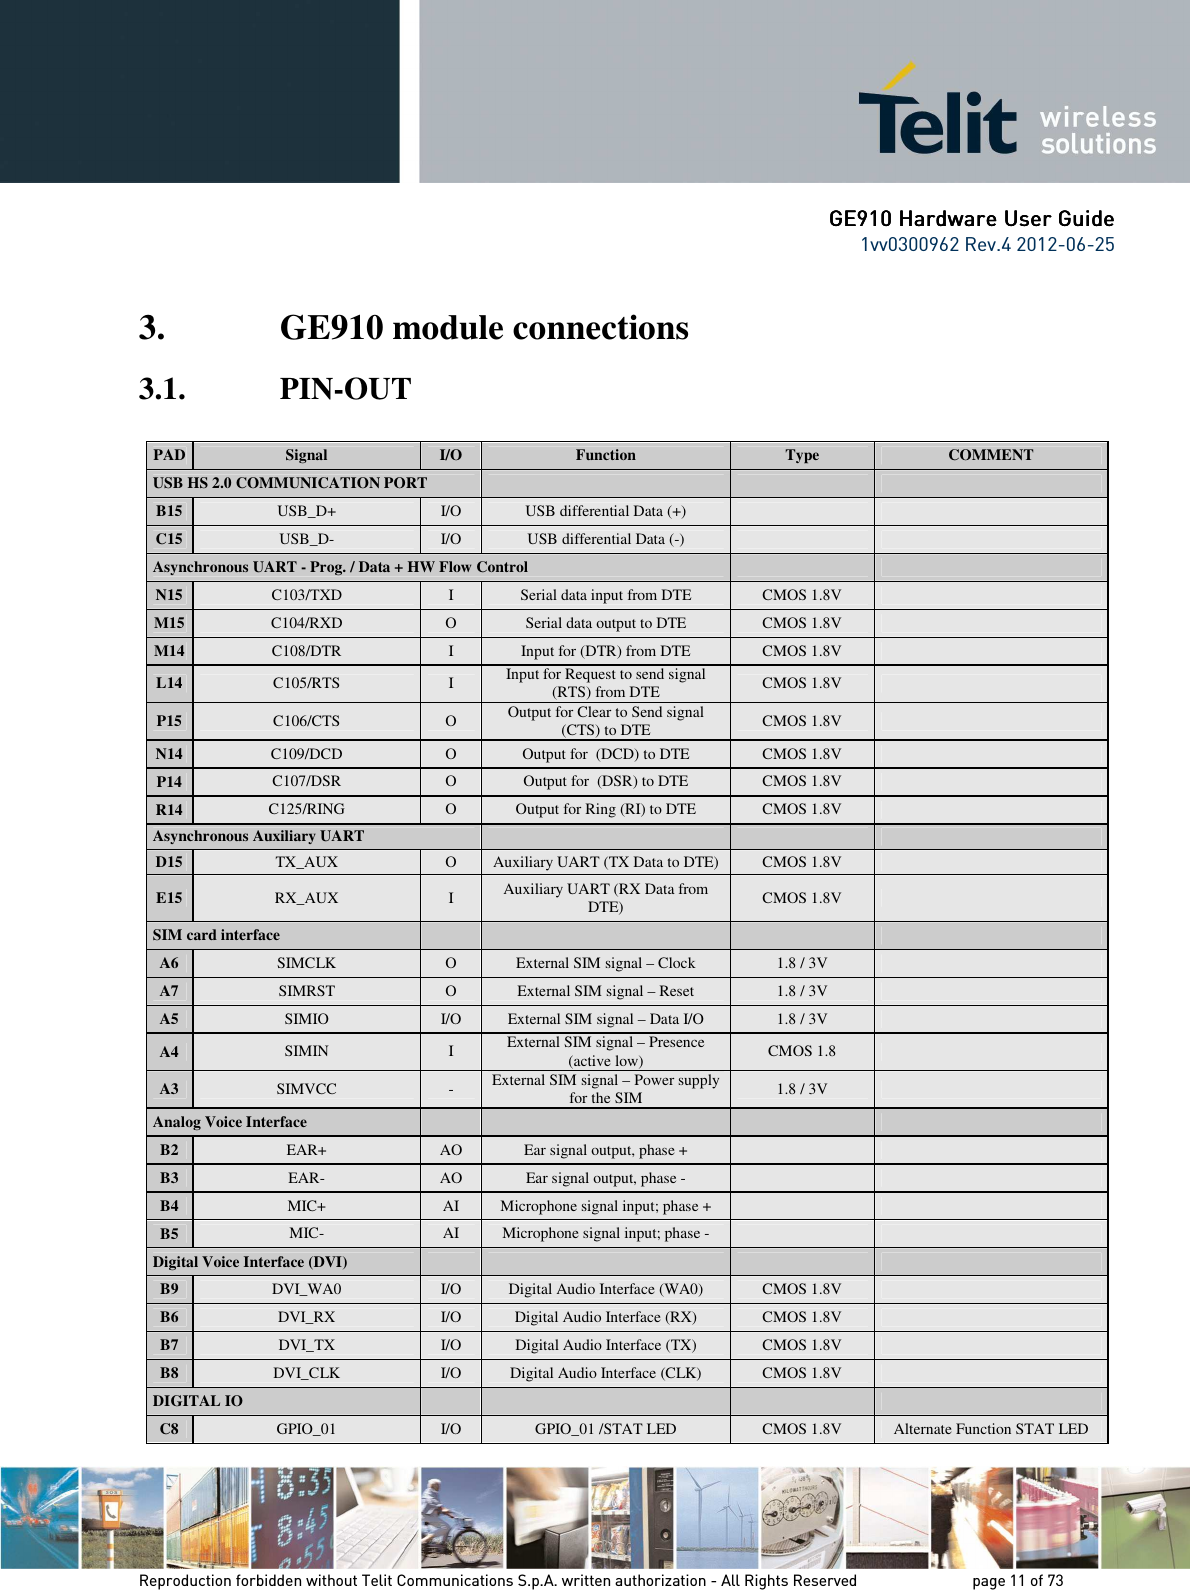      GE9GE9GE9GE910 Hardware User Guide10 Hardware User Guide10 Hardware User Guide10 Hardware User Guide    1vv0300962 Rev.4 2012-06-25    Reproduction forbidden without Telit Communications S.p.A. written authorization - All Rights Reserved    page 11 of 73 Mod. 0805 2011-07 Rev.2 3. GE910 module connections  3.1. PIN-OUT  PAD Signal  I/O  Function  Type  COMMENT USB HS 2.0 COMMUNICATION PORT       B15  USB_D+  I/O  USB differential Data (+)     C15  USB_D-  I/O  USB differential Data (-)     Asynchronous UART - Prog. / Data + HW Flow Control     N15  C103/TXD  I  Serial data input from DTE  CMOS 1.8V   M15 C104/RXD  O  Serial data output to DTE  CMOS 1.8V   M14 C108/DTR  I  Input for (DTR) from DTE  CMOS 1.8V   L14  C105/RTS  I  Input for Request to send signal (RTS) from DTE  CMOS 1.8V   P15  C106/CTS  O  Output for Clear to Send signal (CTS) to DTE CMOS 1.8V   N14  C109/DCD  O  Output for  (DCD) to DTE  CMOS 1.8V   P14  C107/DSR  O  Output for  (DSR) to DTE  CMOS 1.8V   R14  C125/RING  O  Output for Ring (RI) to DTE  CMOS 1.8V   Asynchronous Auxiliary UART       D15  TX_AUX  O  Auxiliary UART (TX Data to DTE)  CMOS 1.8V    E15  RX_AUX  I  Auxiliary UART (RX Data from DTE)  CMOS 1.8V    SIM card interface         A6  SIMCLK  O  External SIM signal – Clock  1.8 / 3V   A7  SIMRST  O  External SIM signal – Reset  1.8 / 3V   A5  SIMIO  I/O  External SIM signal – Data I/O  1.8 / 3V   A4  SIMIN  I  External SIM signal – Presence (active low)  CMOS 1.8   A3  SIMVCC  -  External SIM signal – Power supply for the SIM  1.8 / 3V   Analog Voice Interface         B2 EAR+  AO  Ear signal output, phase +     B3 EAR-  AO  Ear signal output, phase -     B4 MIC+  AI  Microphone signal input; phase +     B5 MIC-  AI  Microphone signal input; phase -     Digital Voice Interface (DVI)        B9  DVI_WA0  I/O  Digital Audio Interface (WA0)  CMOS 1.8V   B6  DVI_RX  I/O  Digital Audio Interface (RX)  CMOS 1.8V   B7  DVI_TX  I/O  Digital Audio Interface (TX)  CMOS 1.8V   B8  DVI_CLK  I/O  Digital Audio Interface (CLK)  CMOS 1.8V   DIGITAL IO         C8  GPIO_01  I/O  GPIO_01 /STAT LED  CMOS 1.8V  Alternate Function STAT LED 